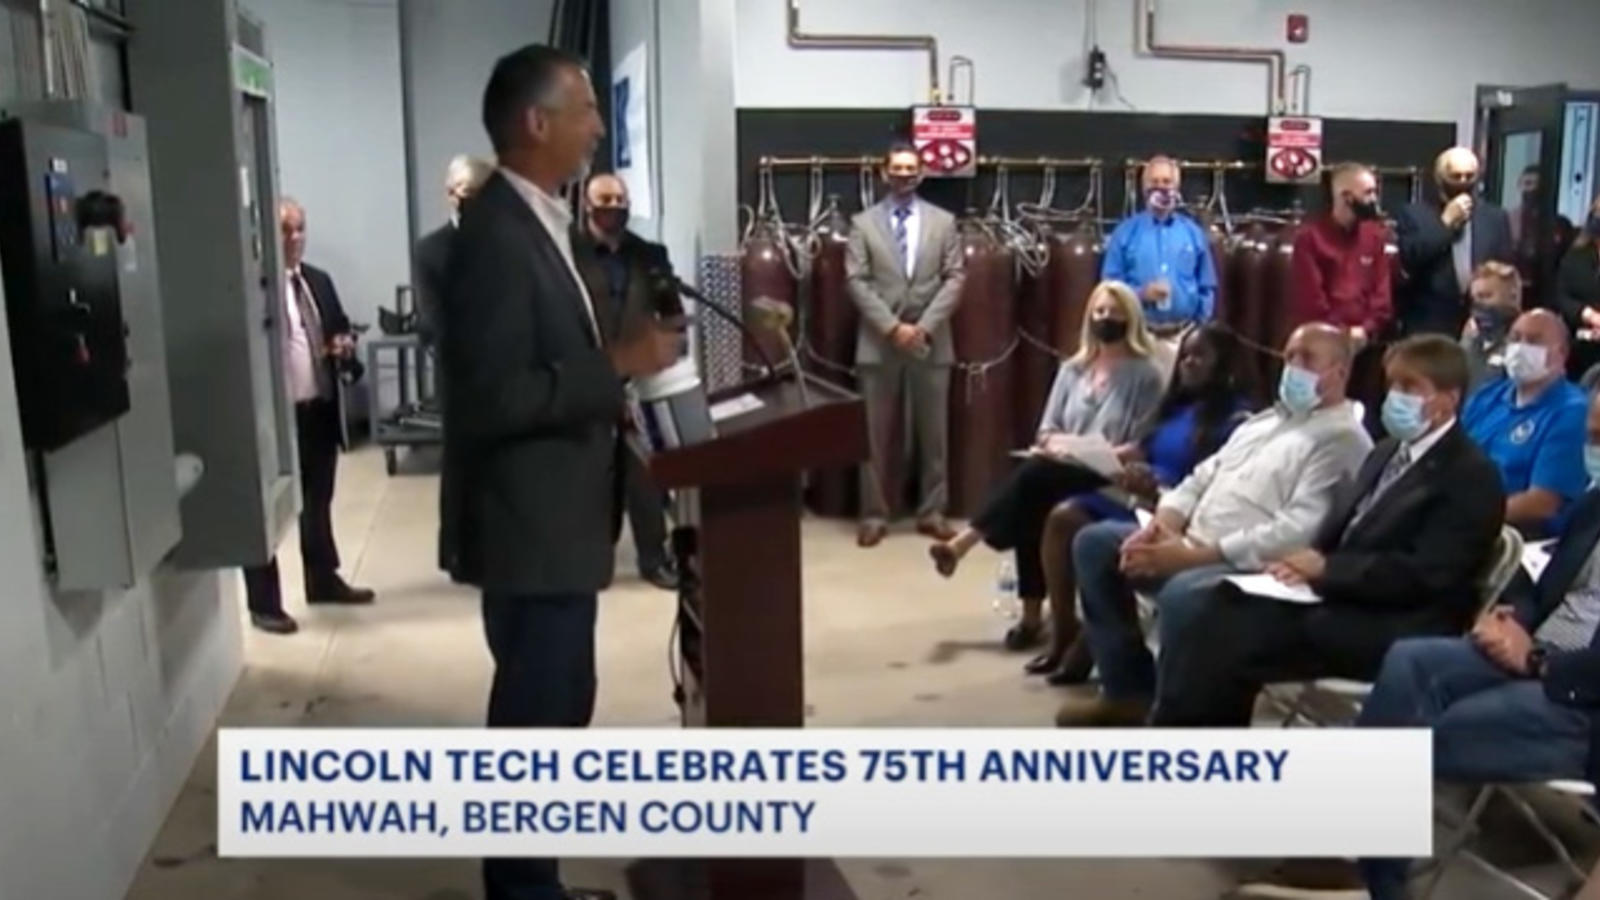 Lincoln Tech Celebrates its 75th Anniversary by Adding Welding